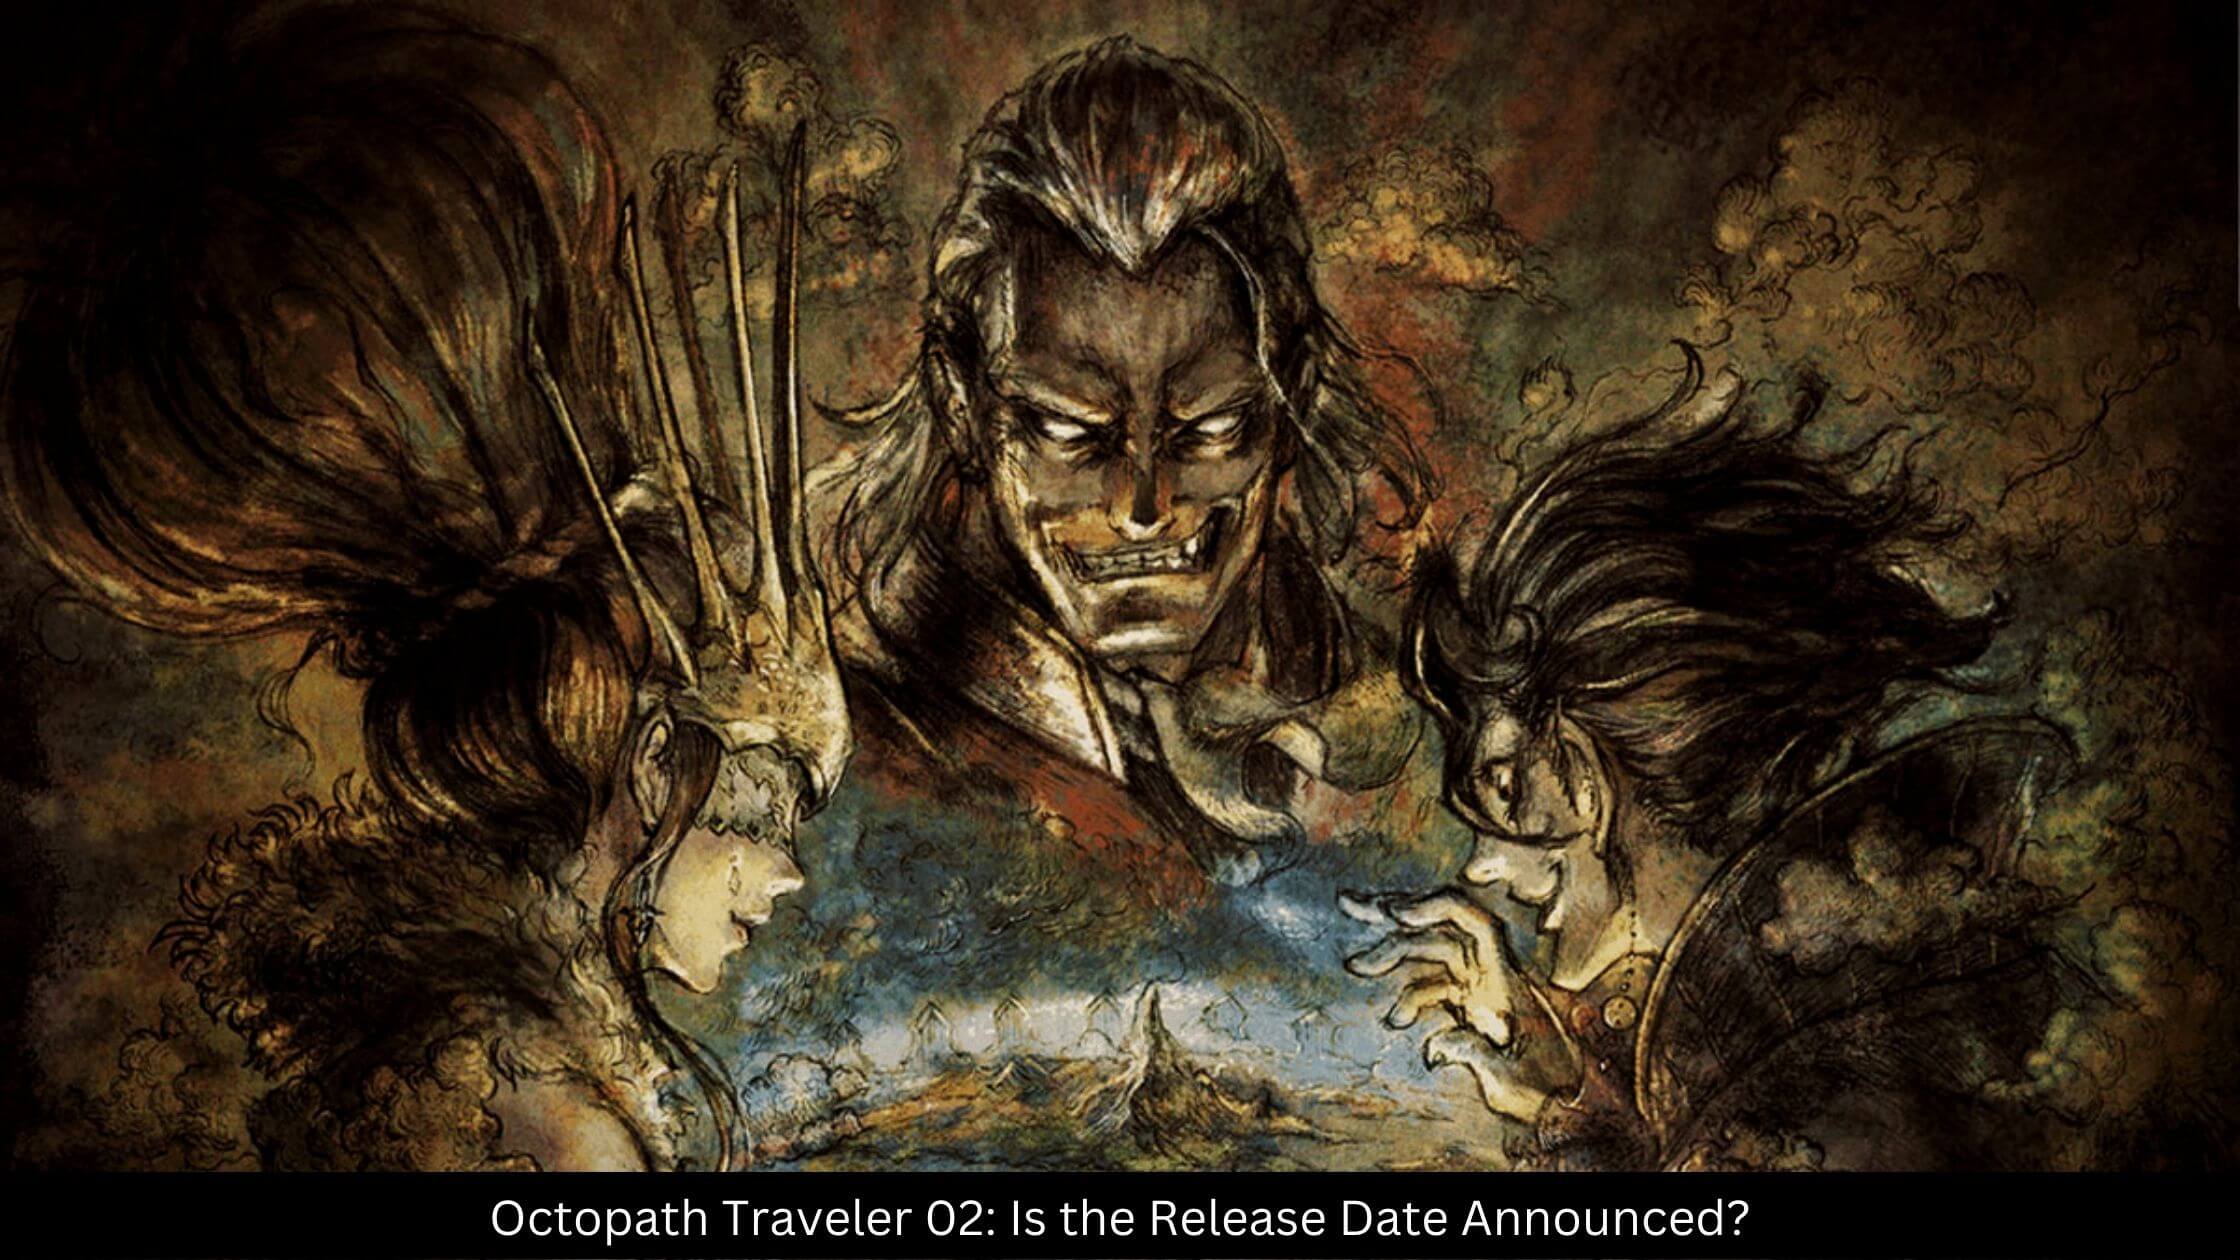 Octopath Traveler 2: Is The Release Date Announced?